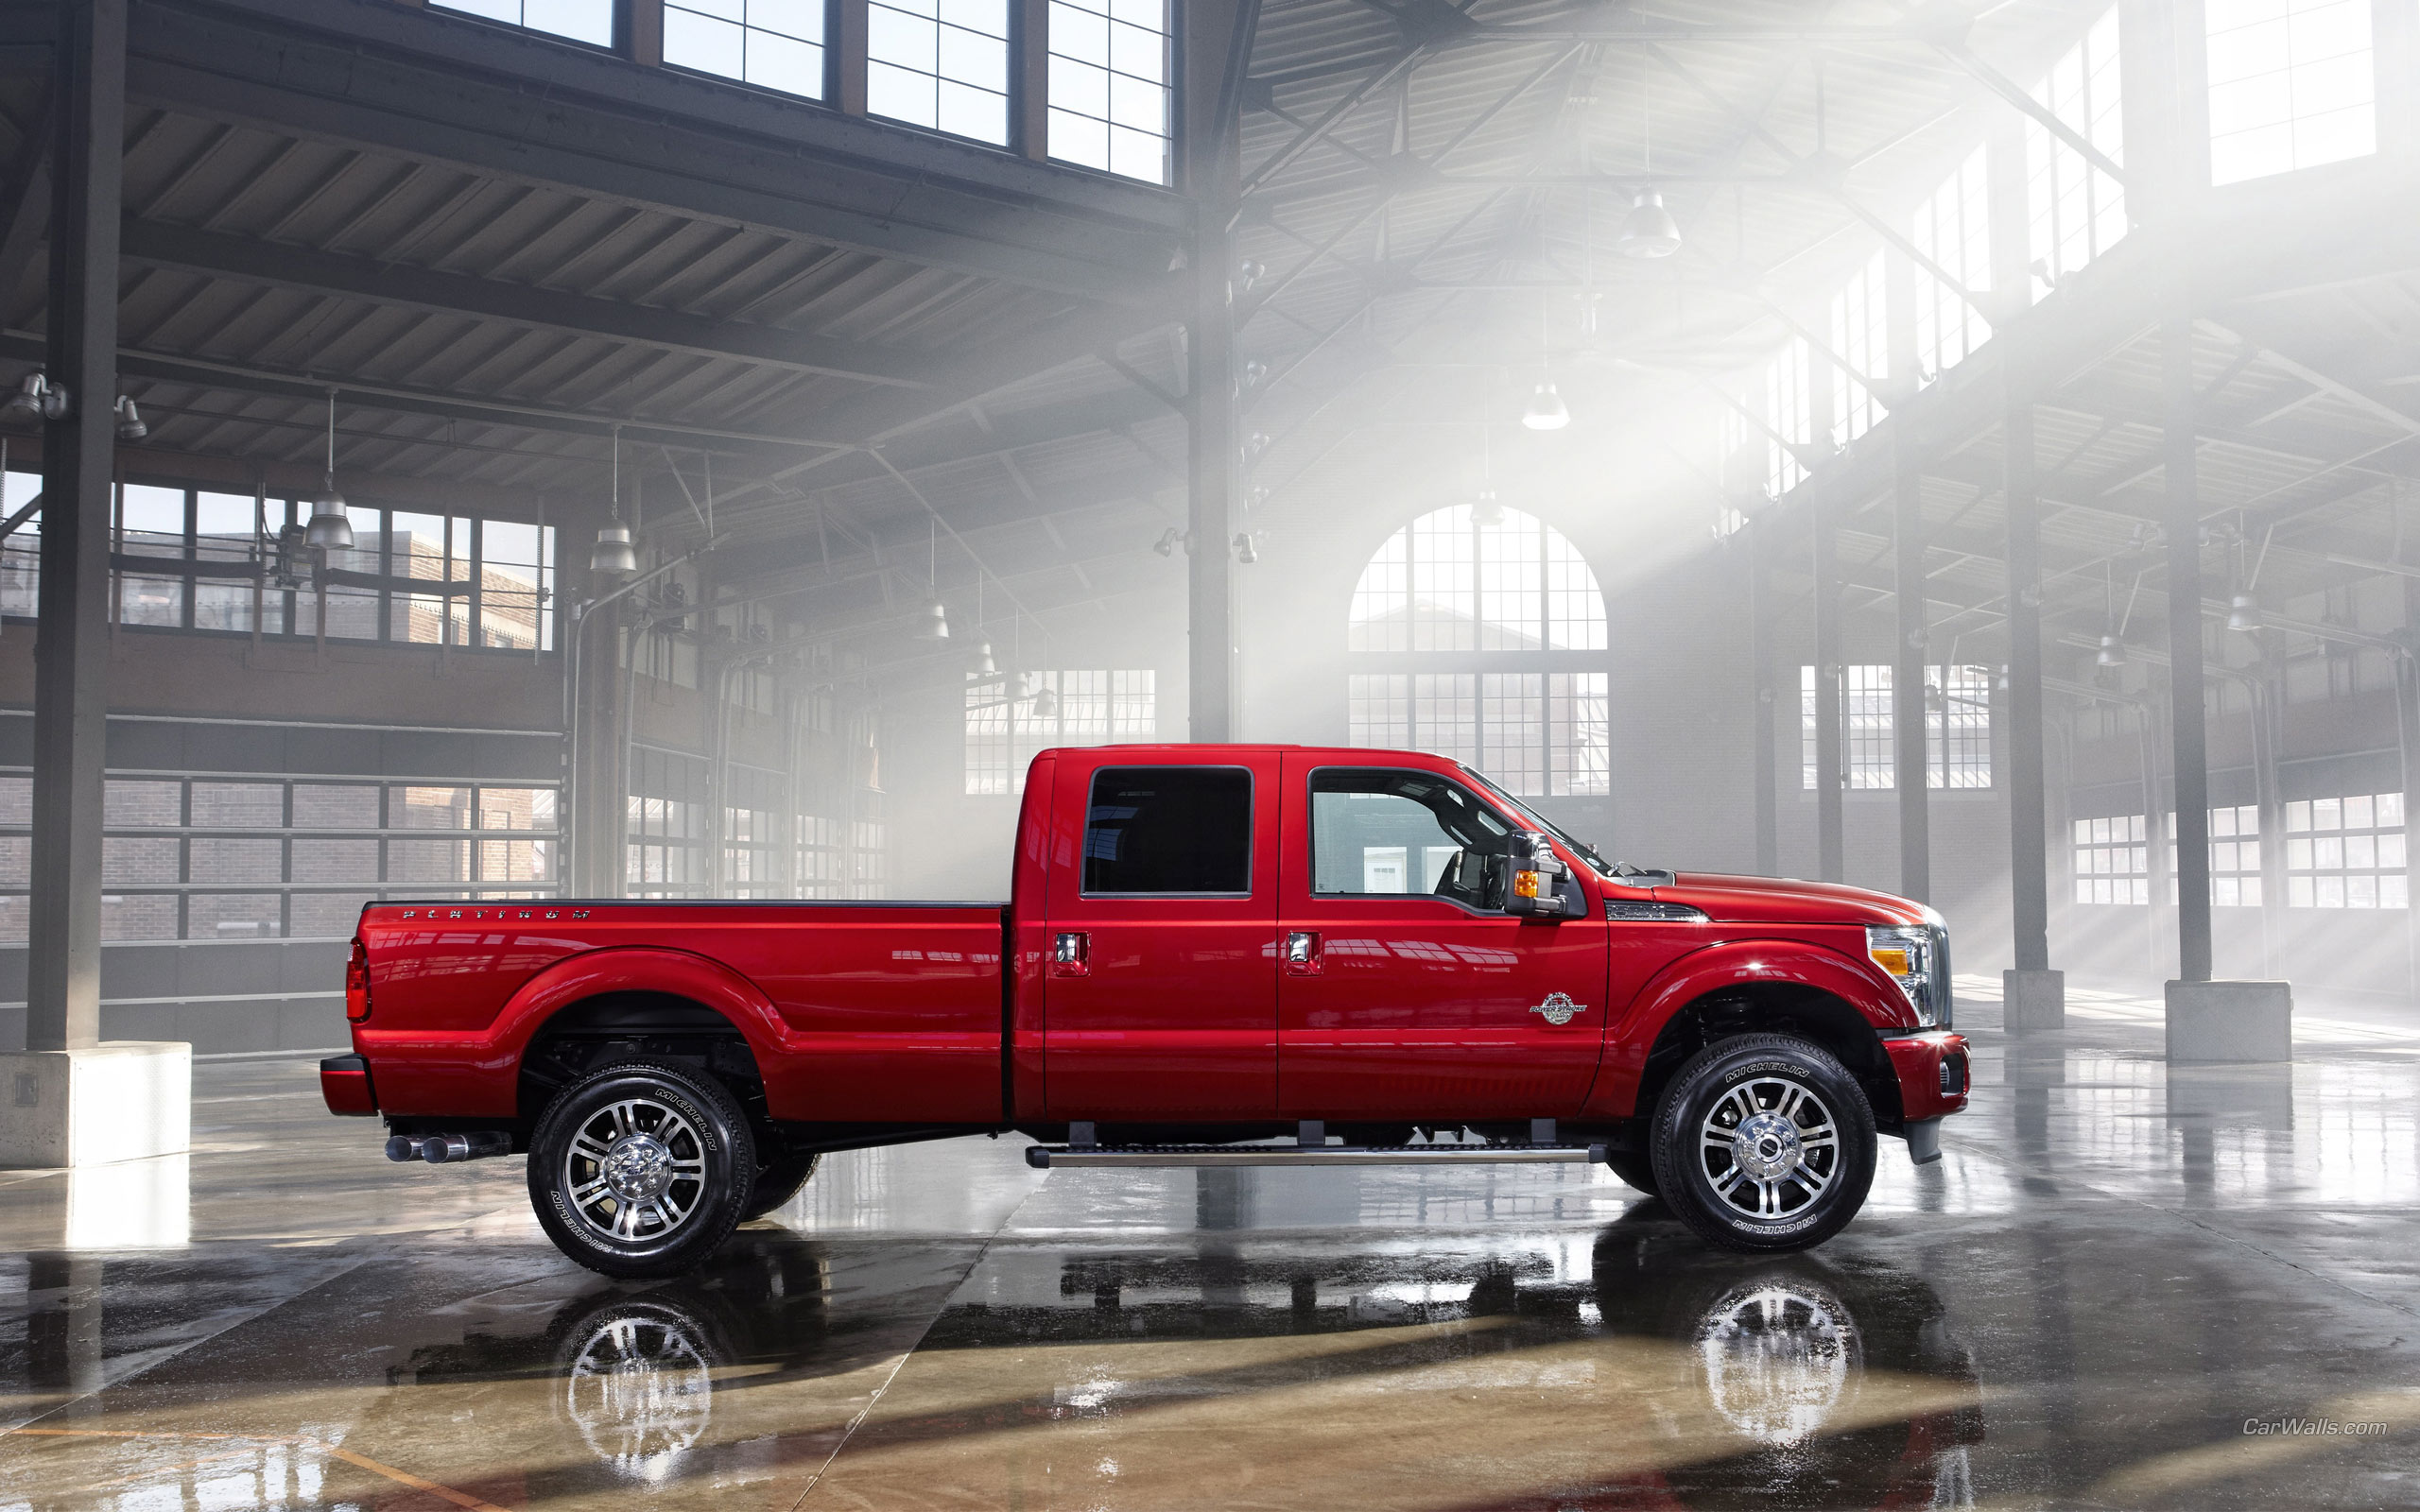 Vehicles 2013 Ford F-Series Super Duty HD Wallpaper | Background Image